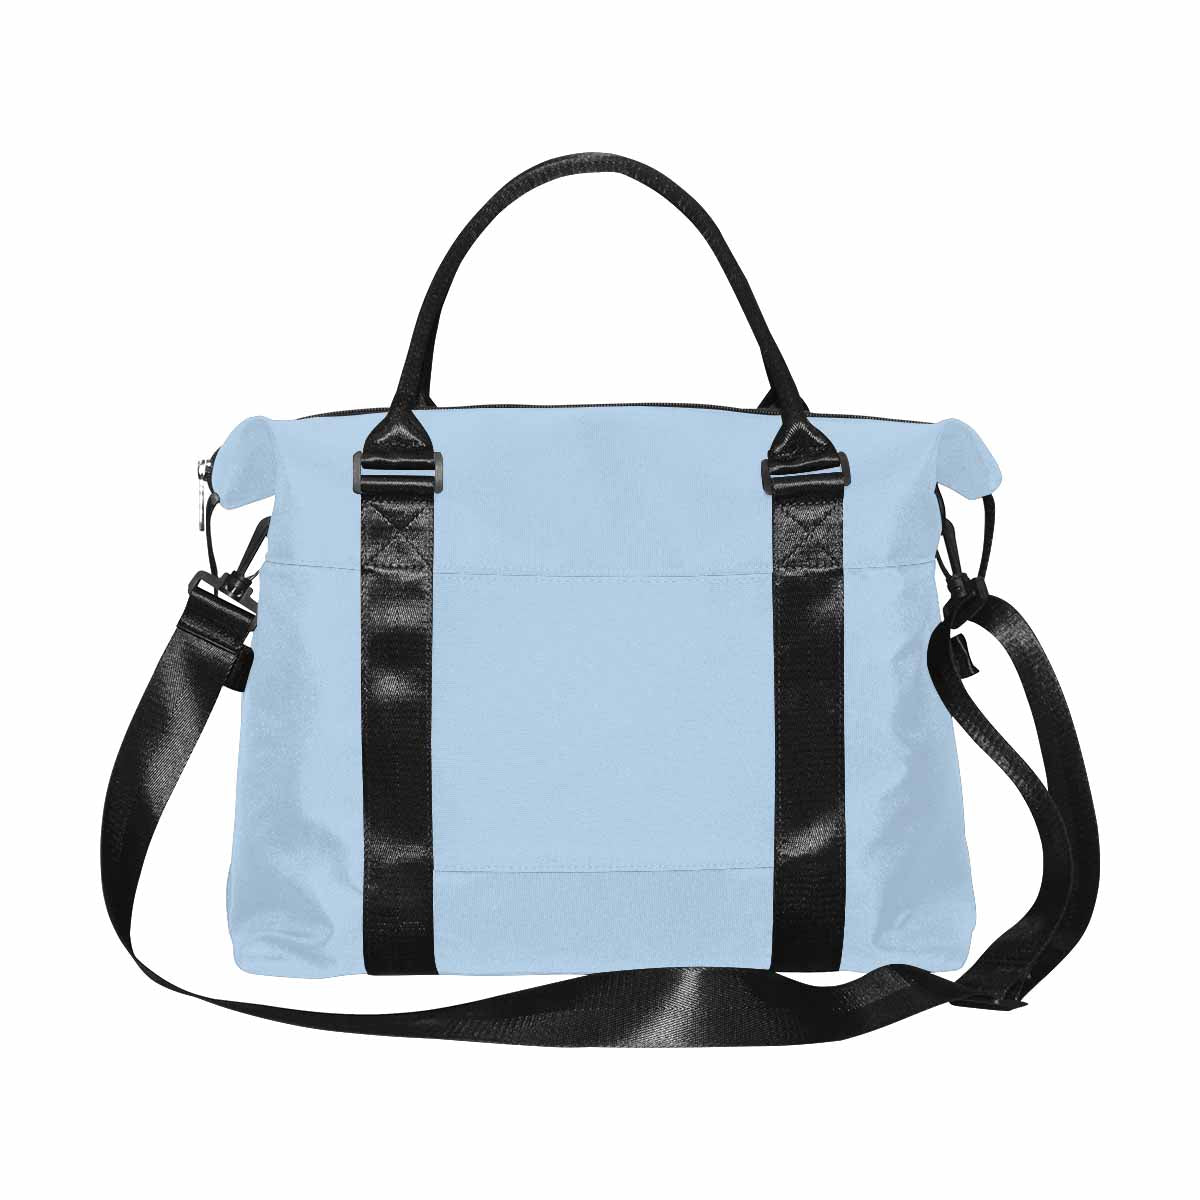 Serenity Blue Canvas Carry On